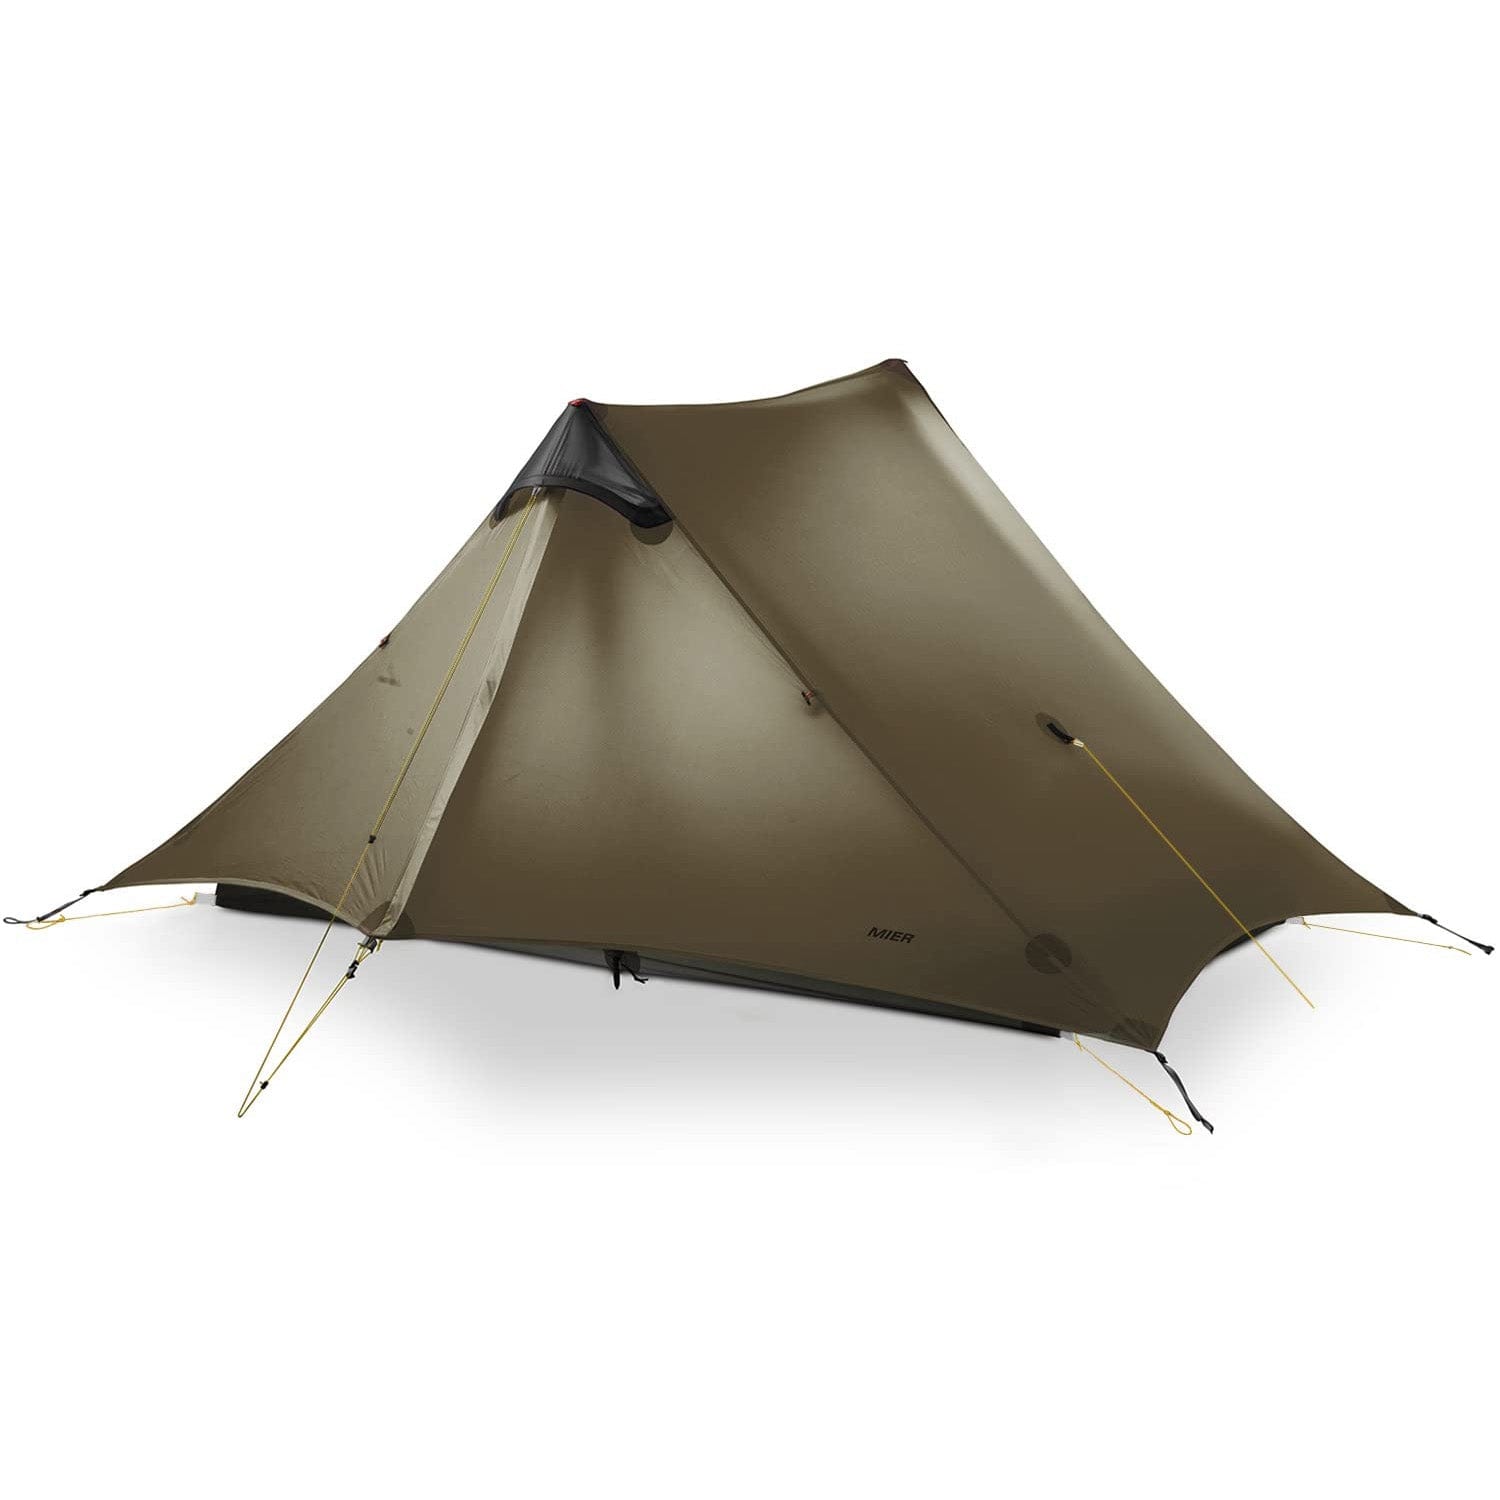 Lanshan 1-2 Person Camping Tent Rainfly Tent Accessories 2-Person / Khali MIER